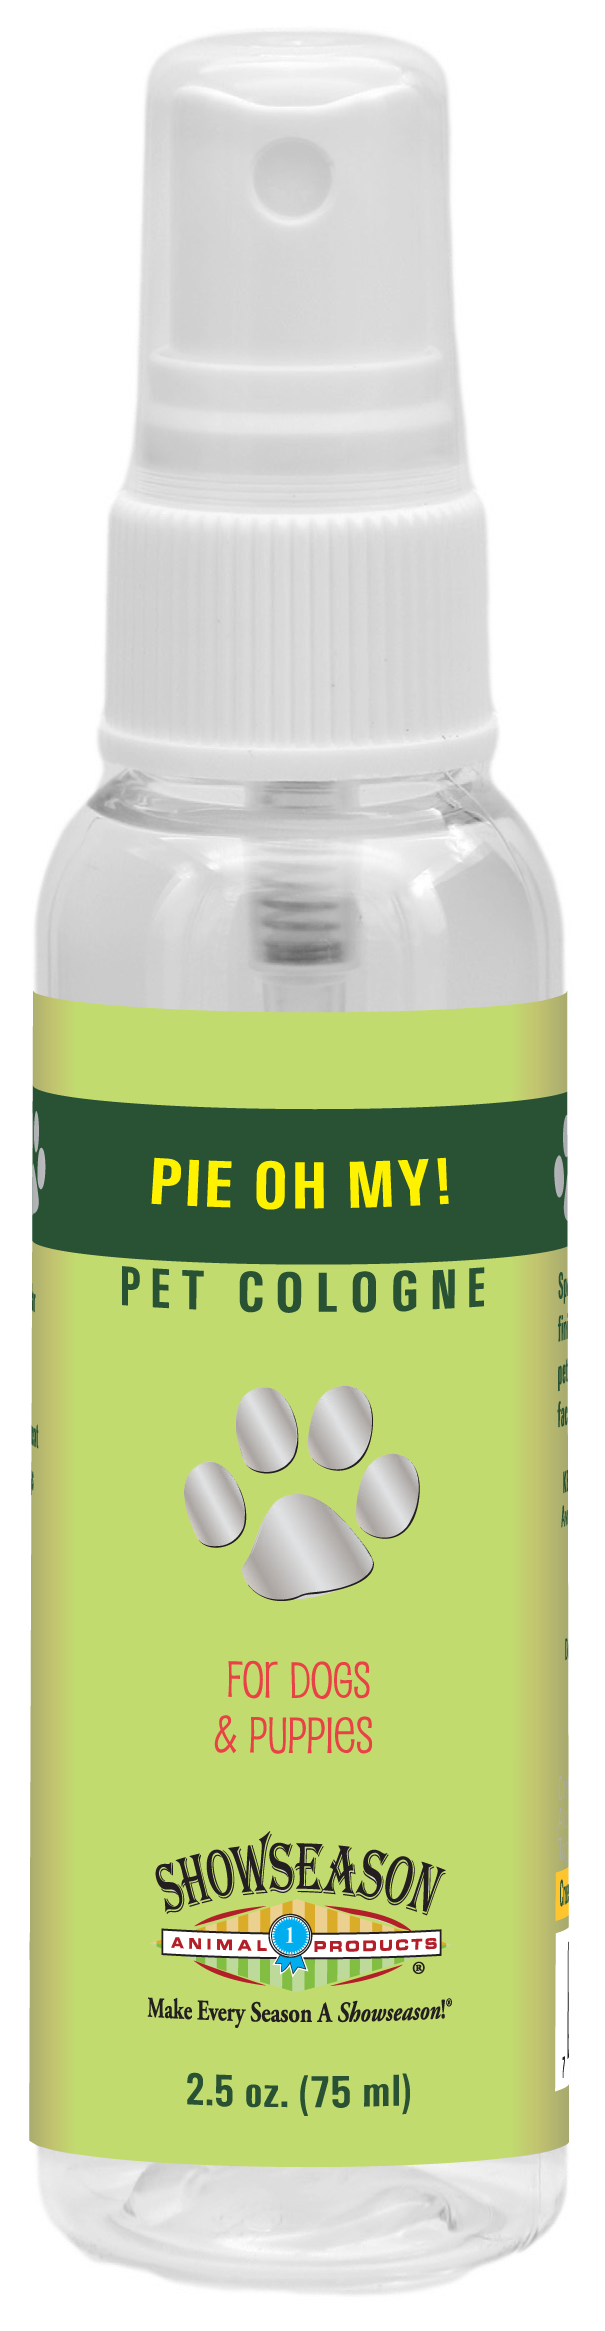 Pie Oh My! Pet Cologne | Showseason®